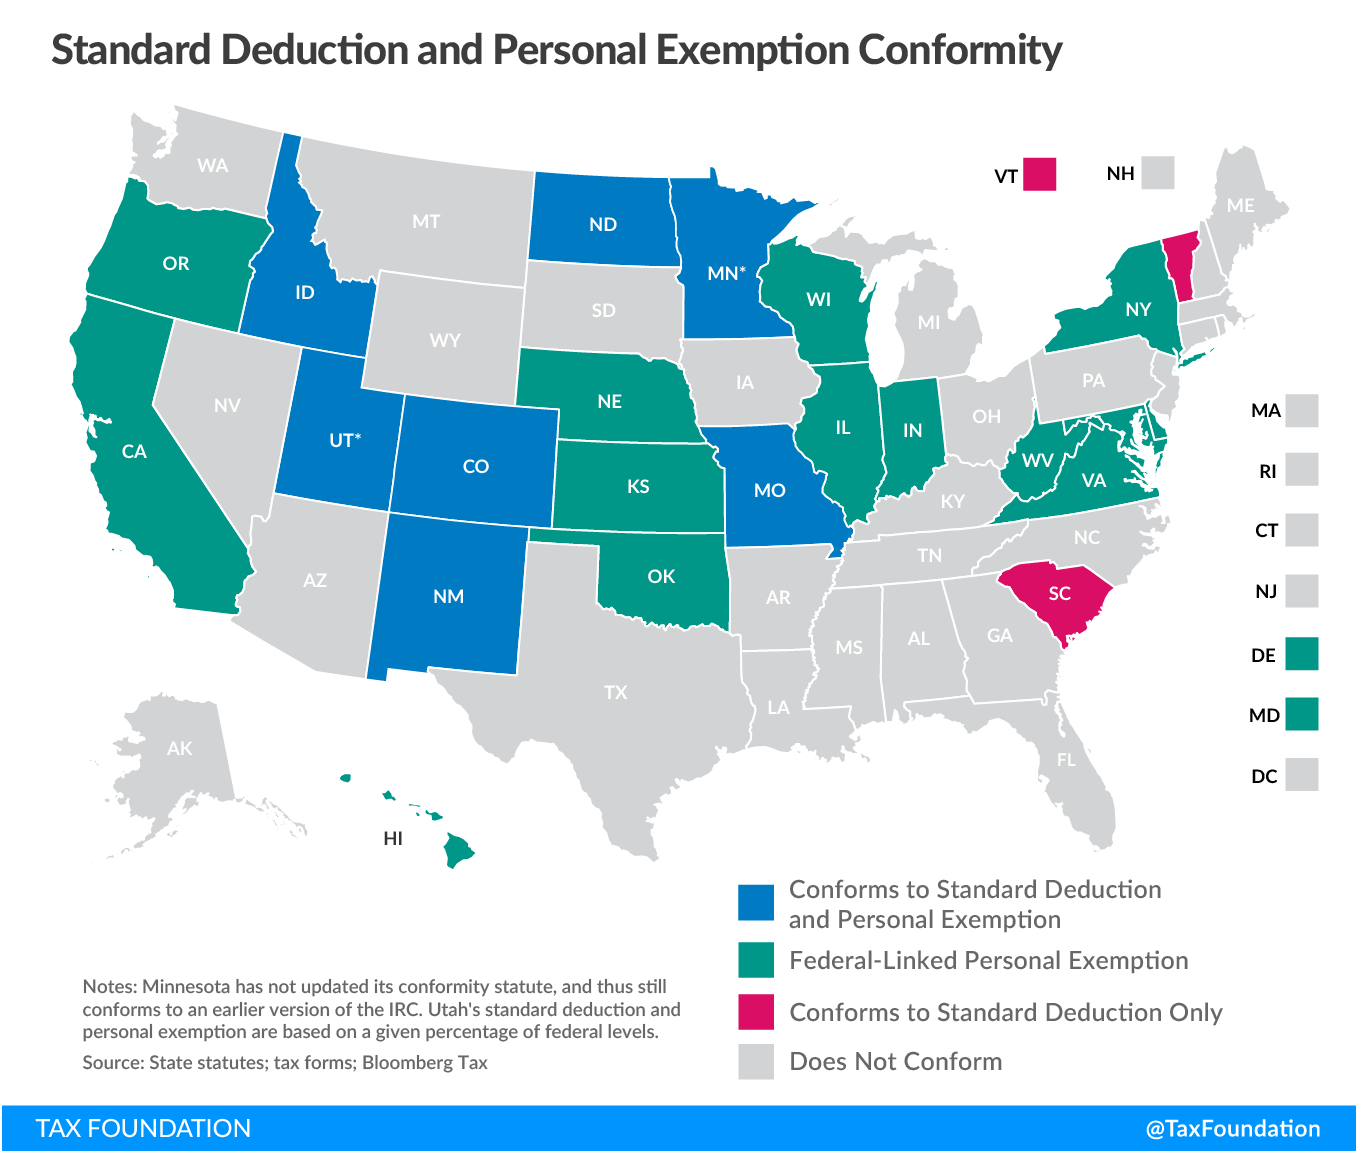 Standard deduction and personal exemption conformity post-TCJA